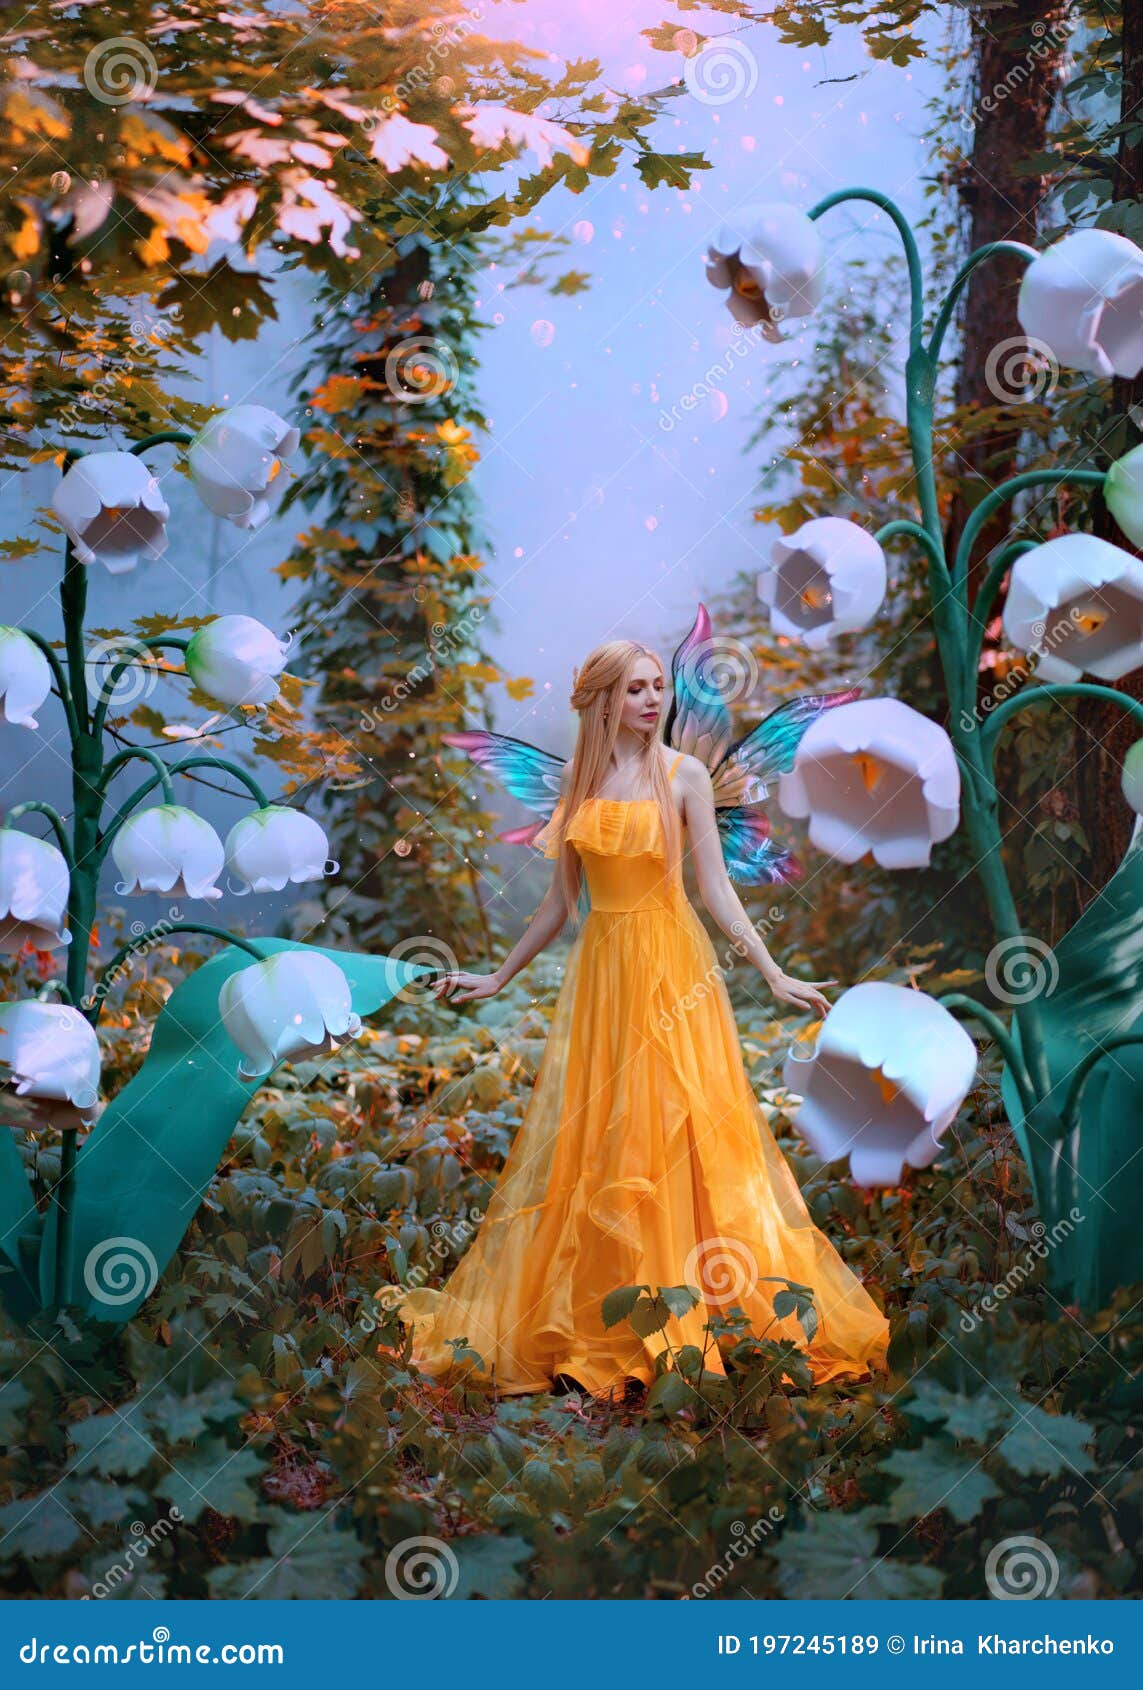 A Fantasy Woman Forest Fairy. Fashion Model in Yellow Dress with